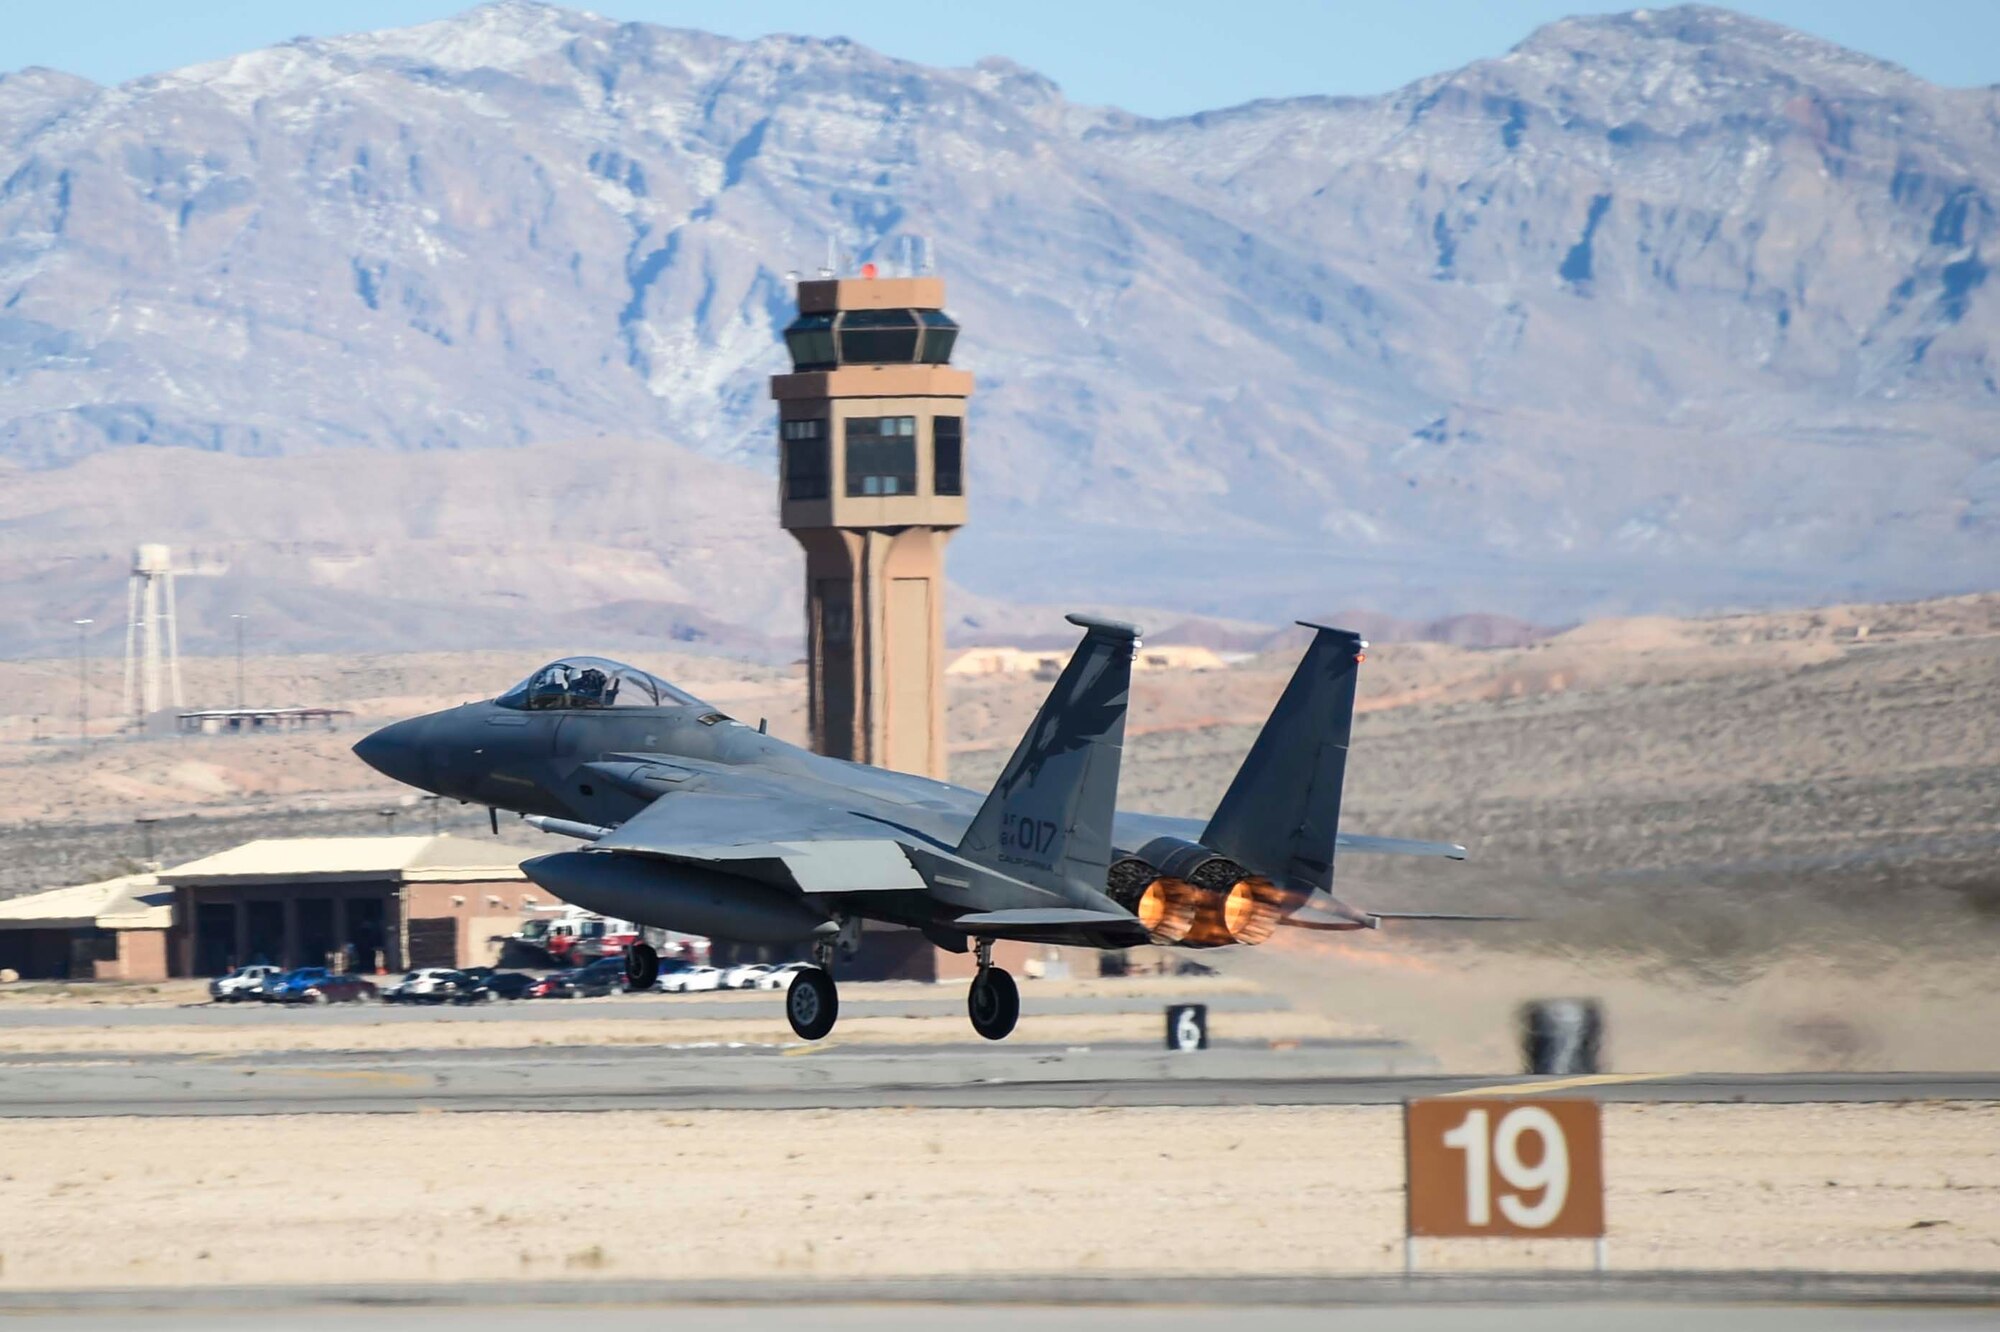 A U.S. Air Force F-15C Eagle assigned to the 144th Fighter Wing, Fresno Air National Guard Base, Calif. takes off at Nellis Air Force Base, Nev. Feb. 3, 2016, as part of Red Flag 16-1. The 144th joined more than 30 units from the U.S. and its allies in this combat training exercise, learning to fight and win together. (U.S. Air National Guard photo by Senior Airman Klynne Pearl Serrano)